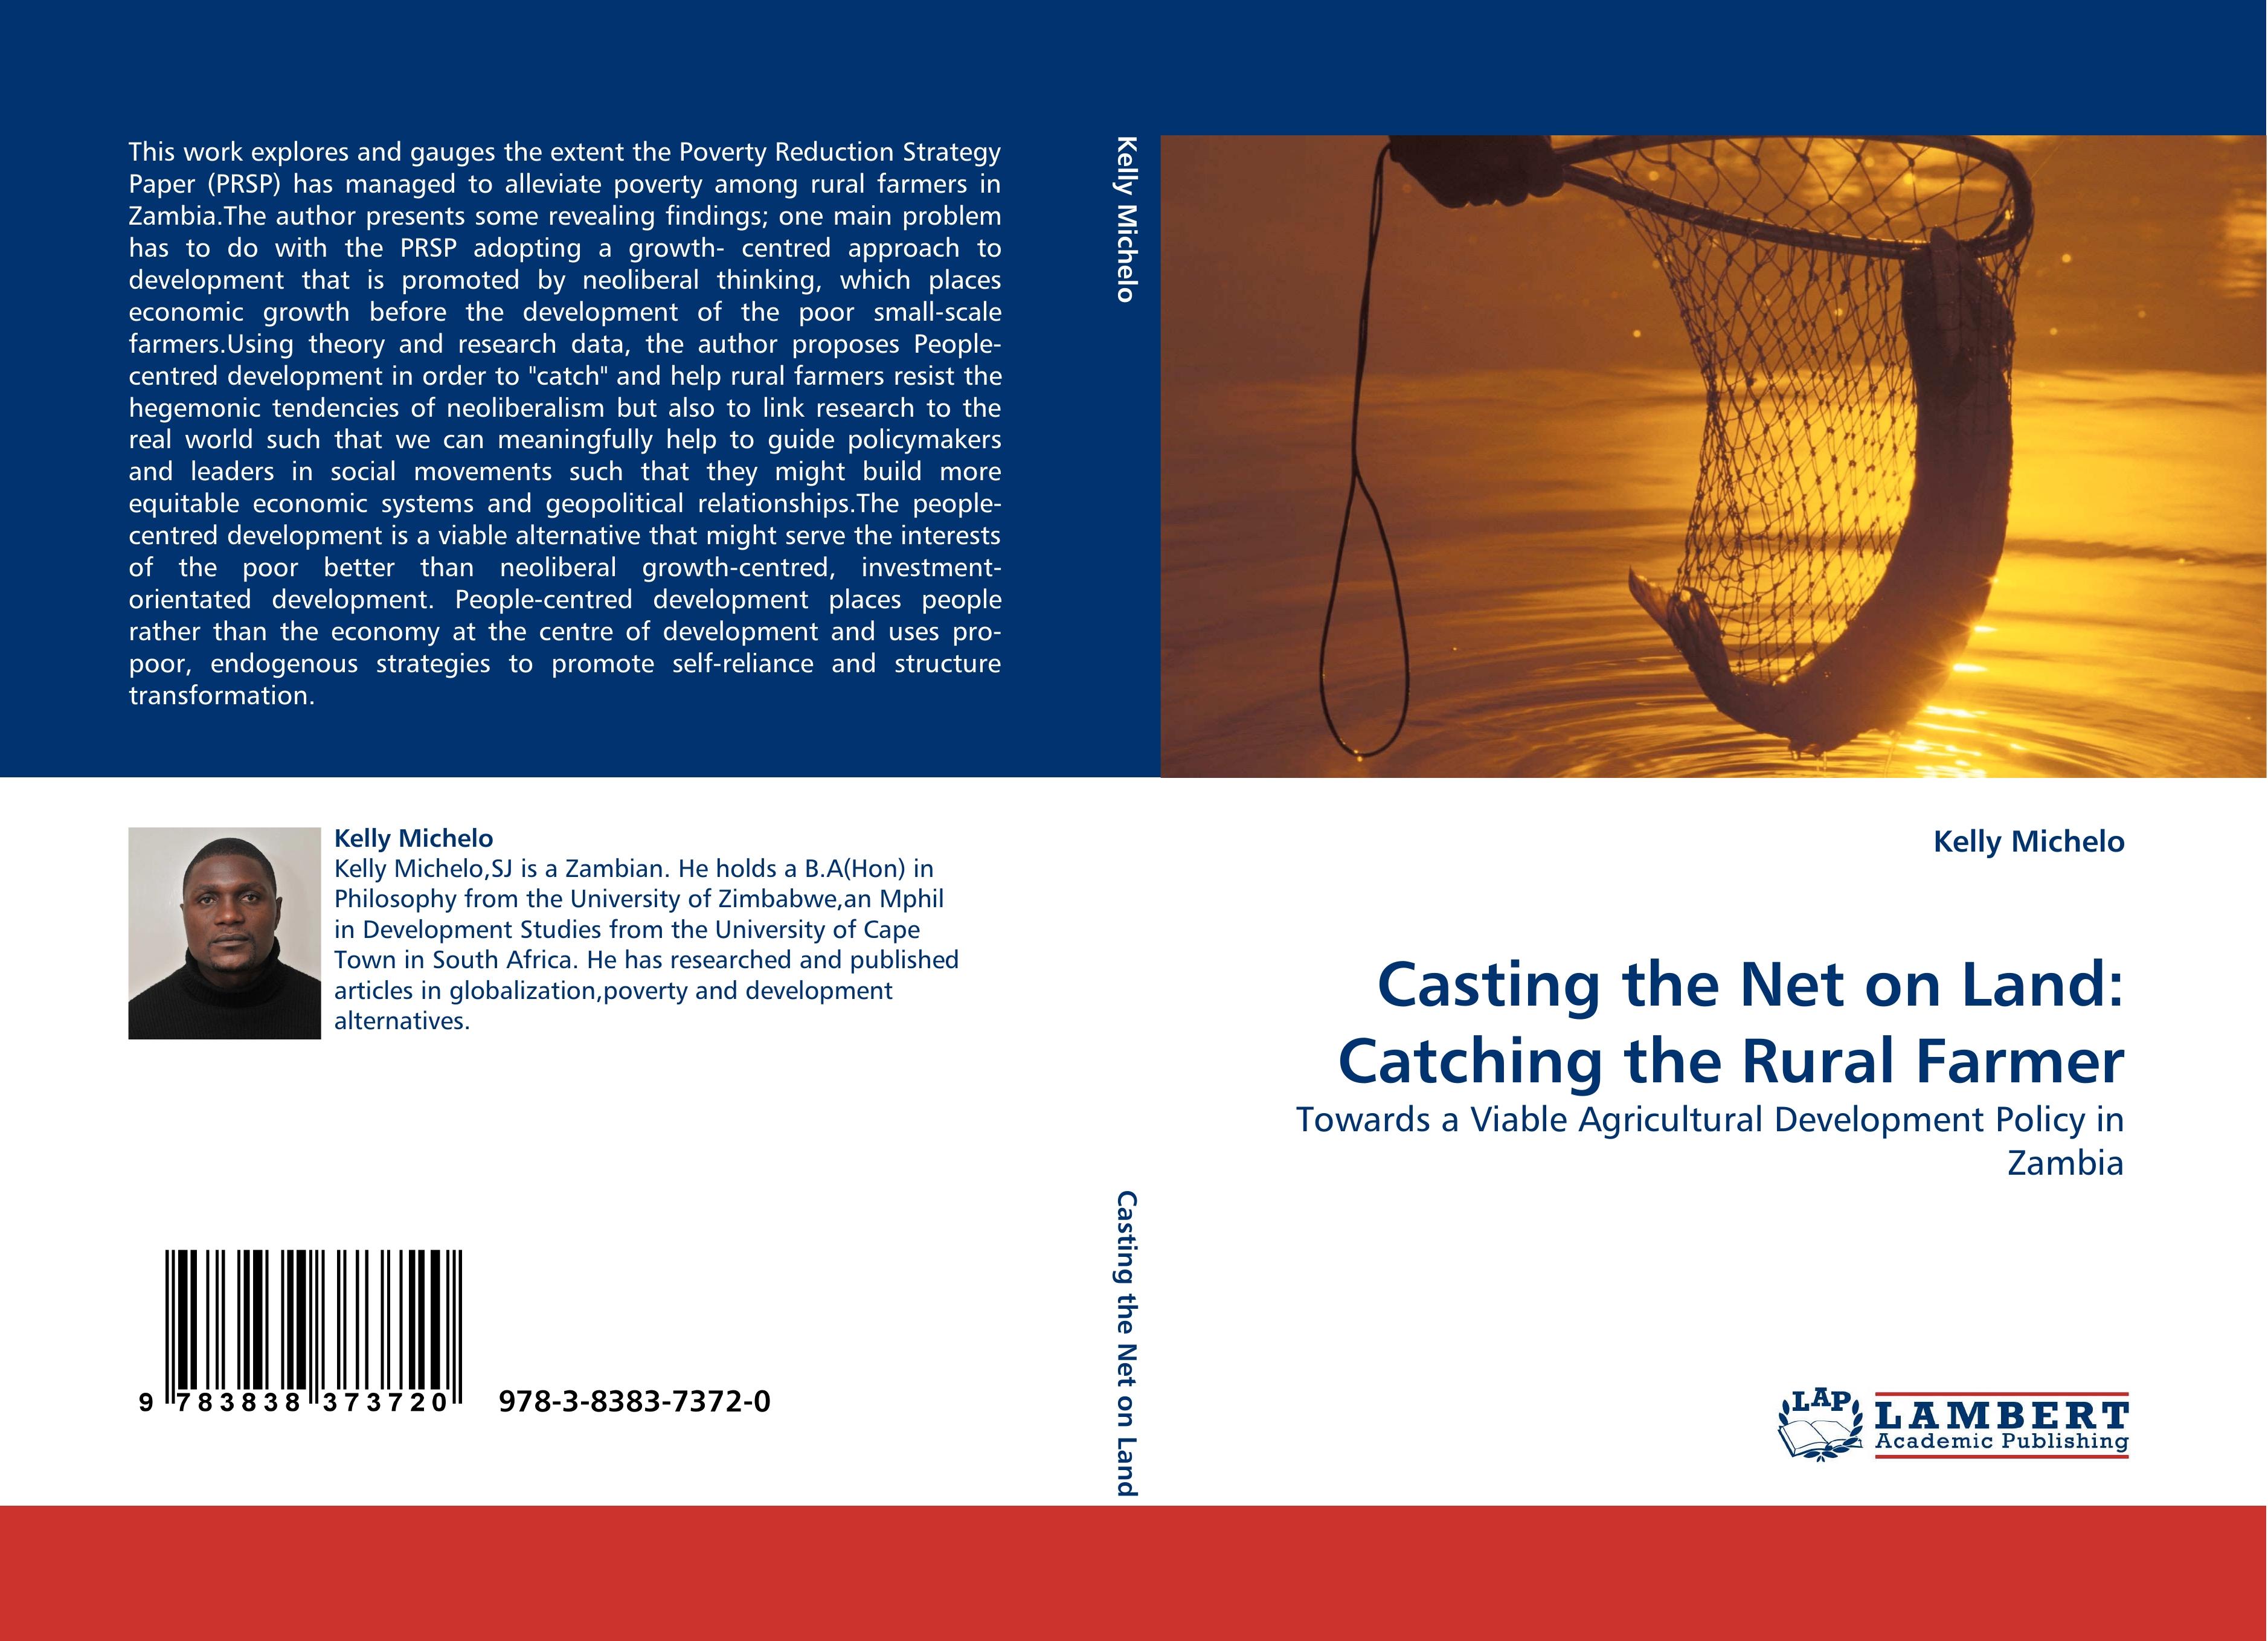 Casting the Net on Land: Catching the Rural Farmer / Towards a Viable Agricultural Development Policy in Zambia / Kelly Michelo / Taschenbuch / Paperback / 128 S. / Englisch / 2010 / EAN 9783838373720 - Michelo, Kelly